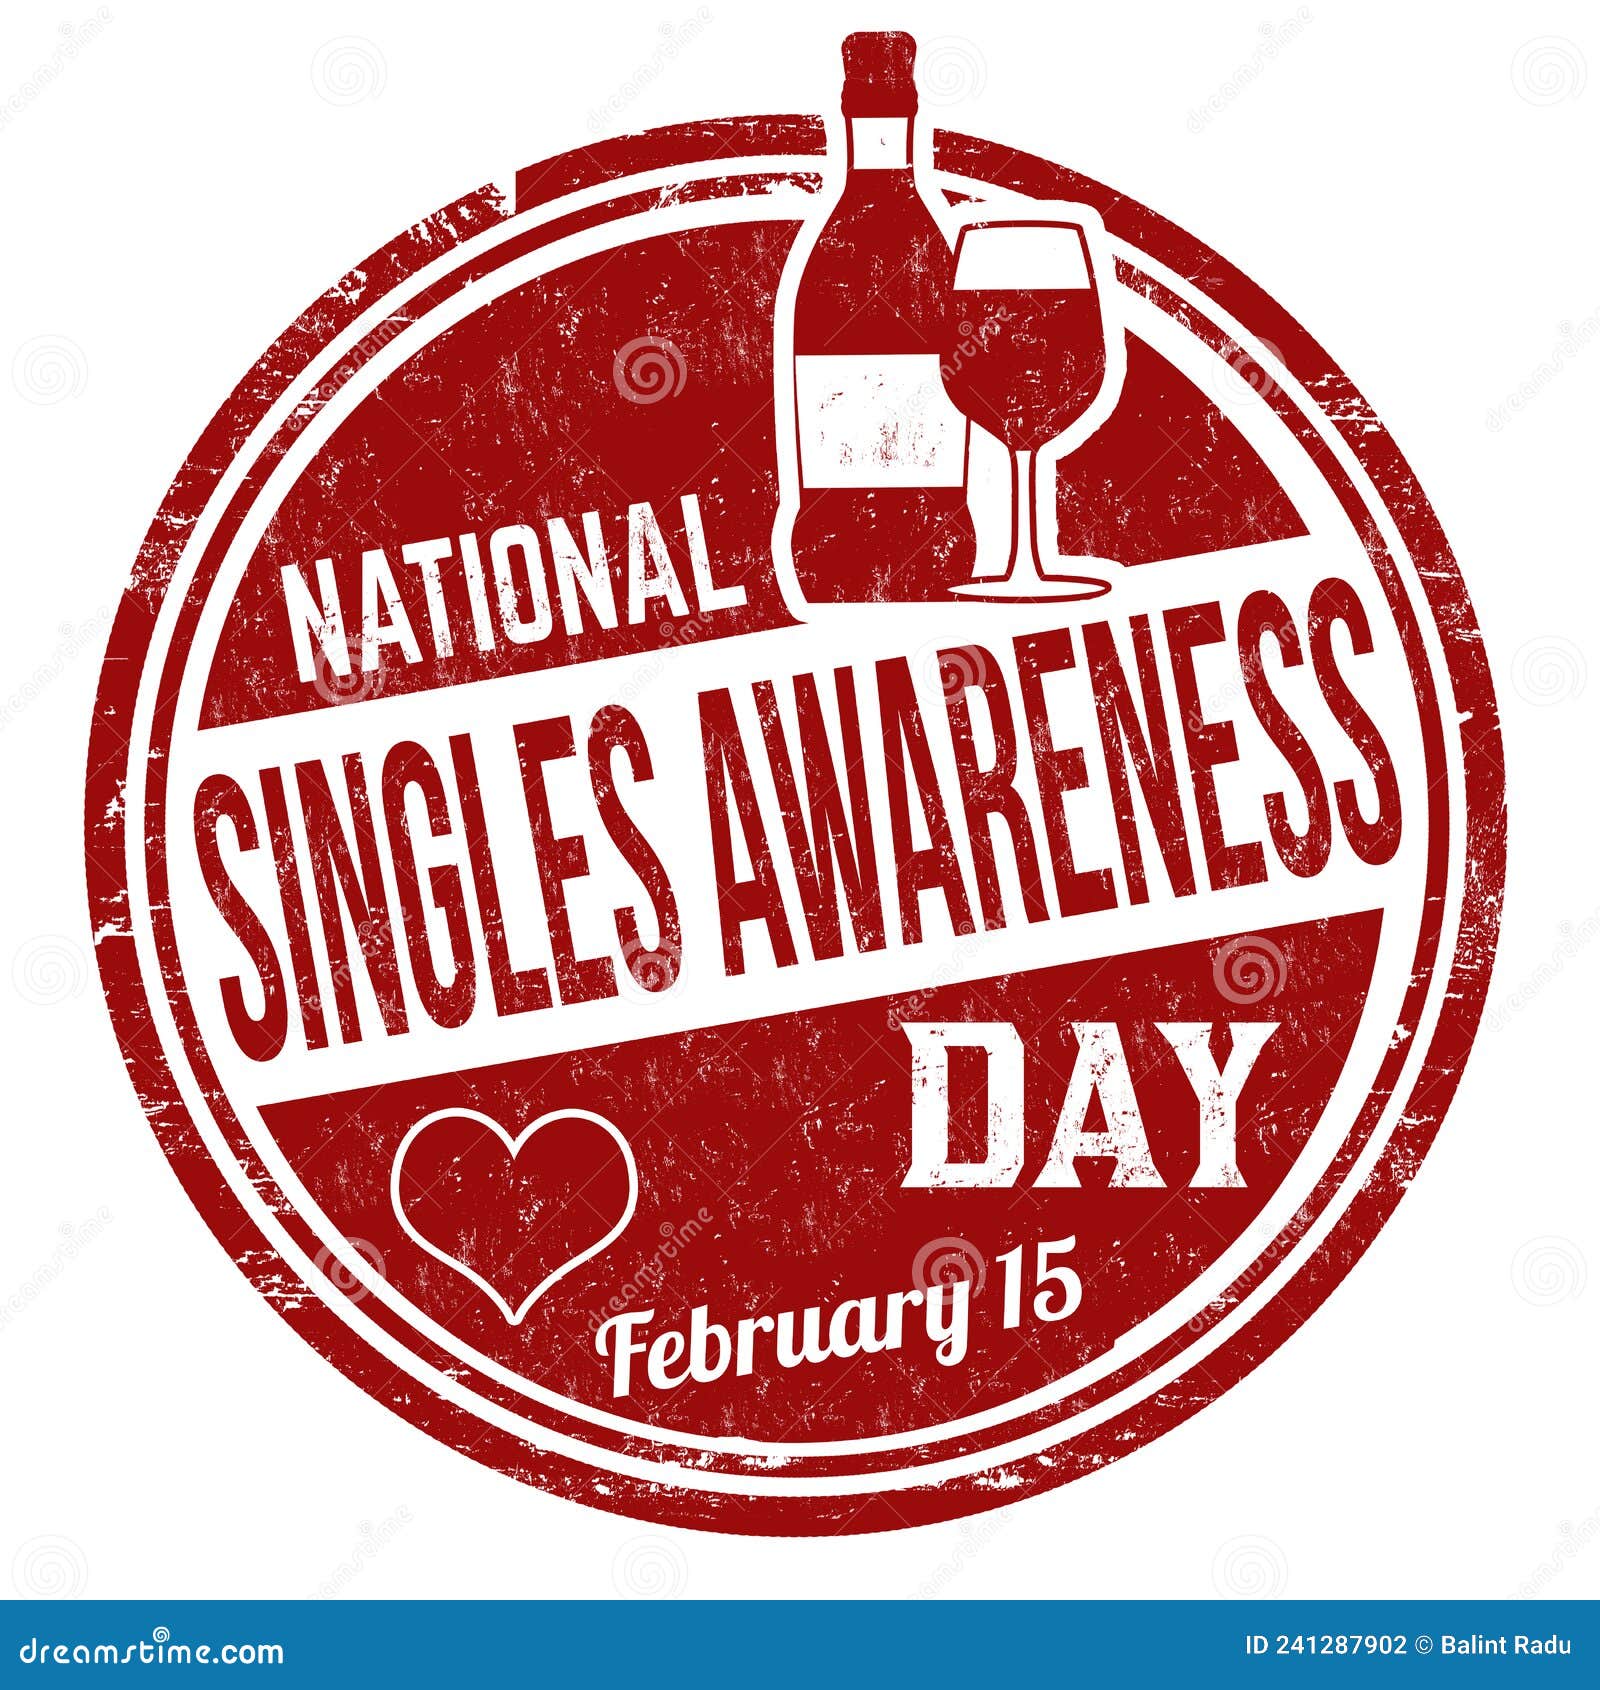 national singles awareness day grunge rubber stamp